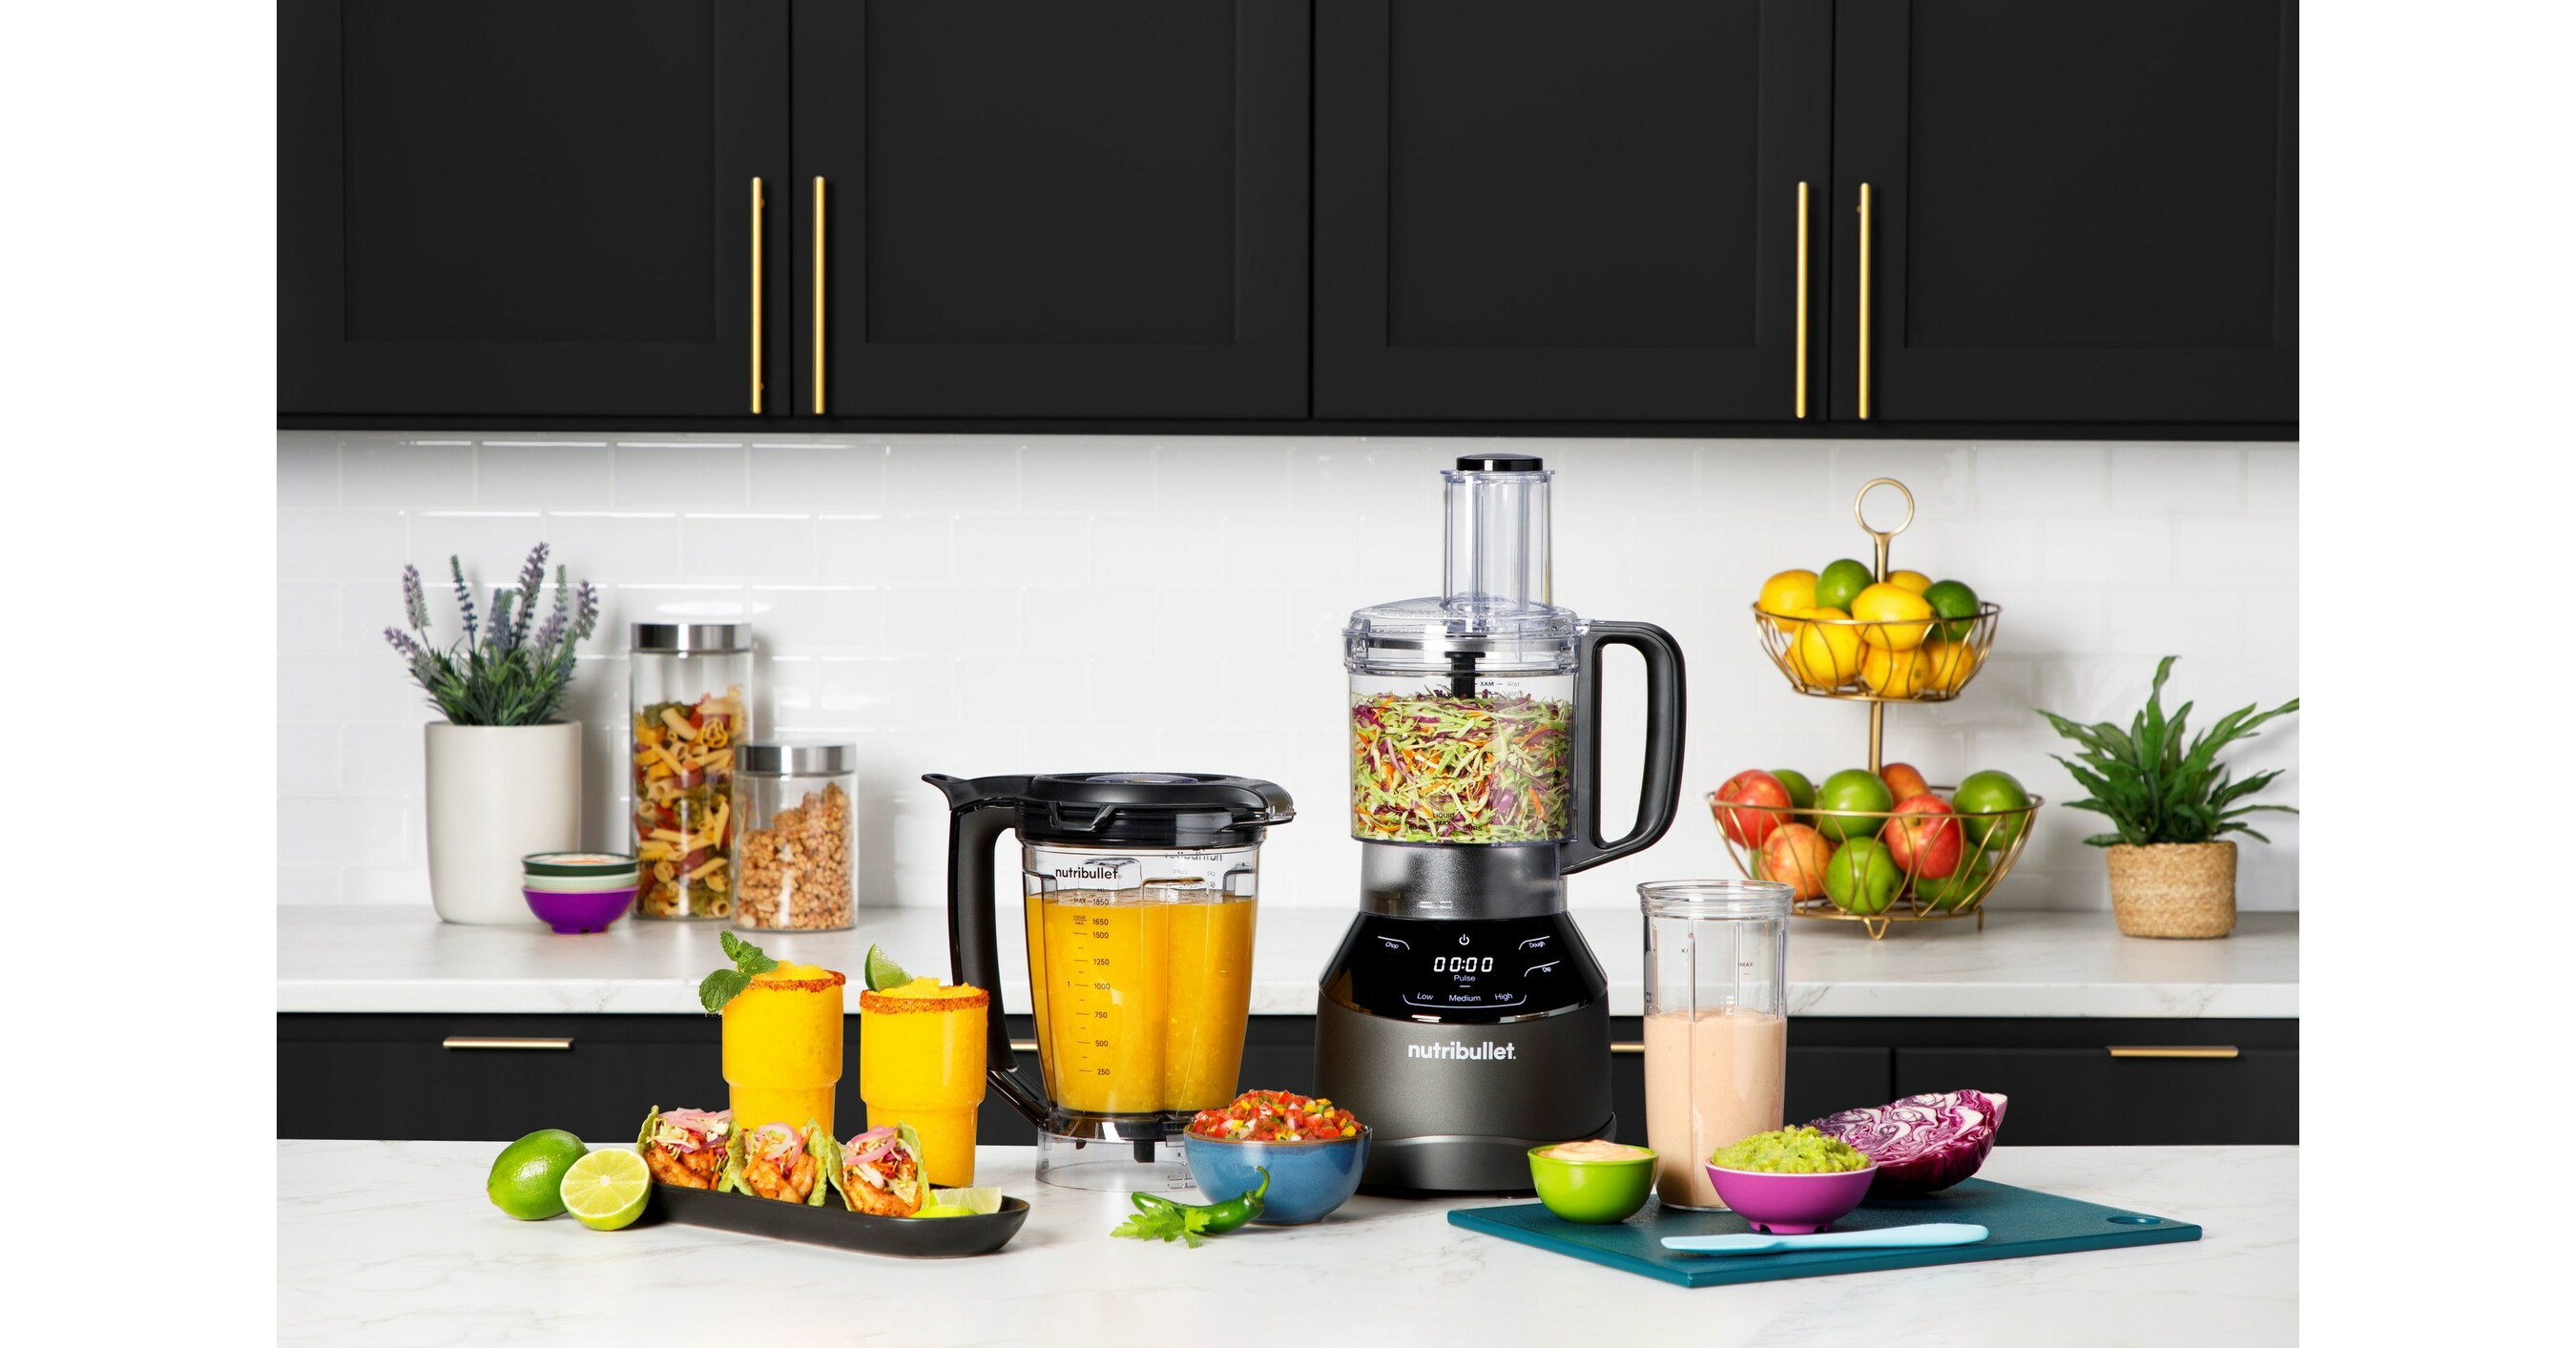 The Nutribullet food processor will become your new favorite sous